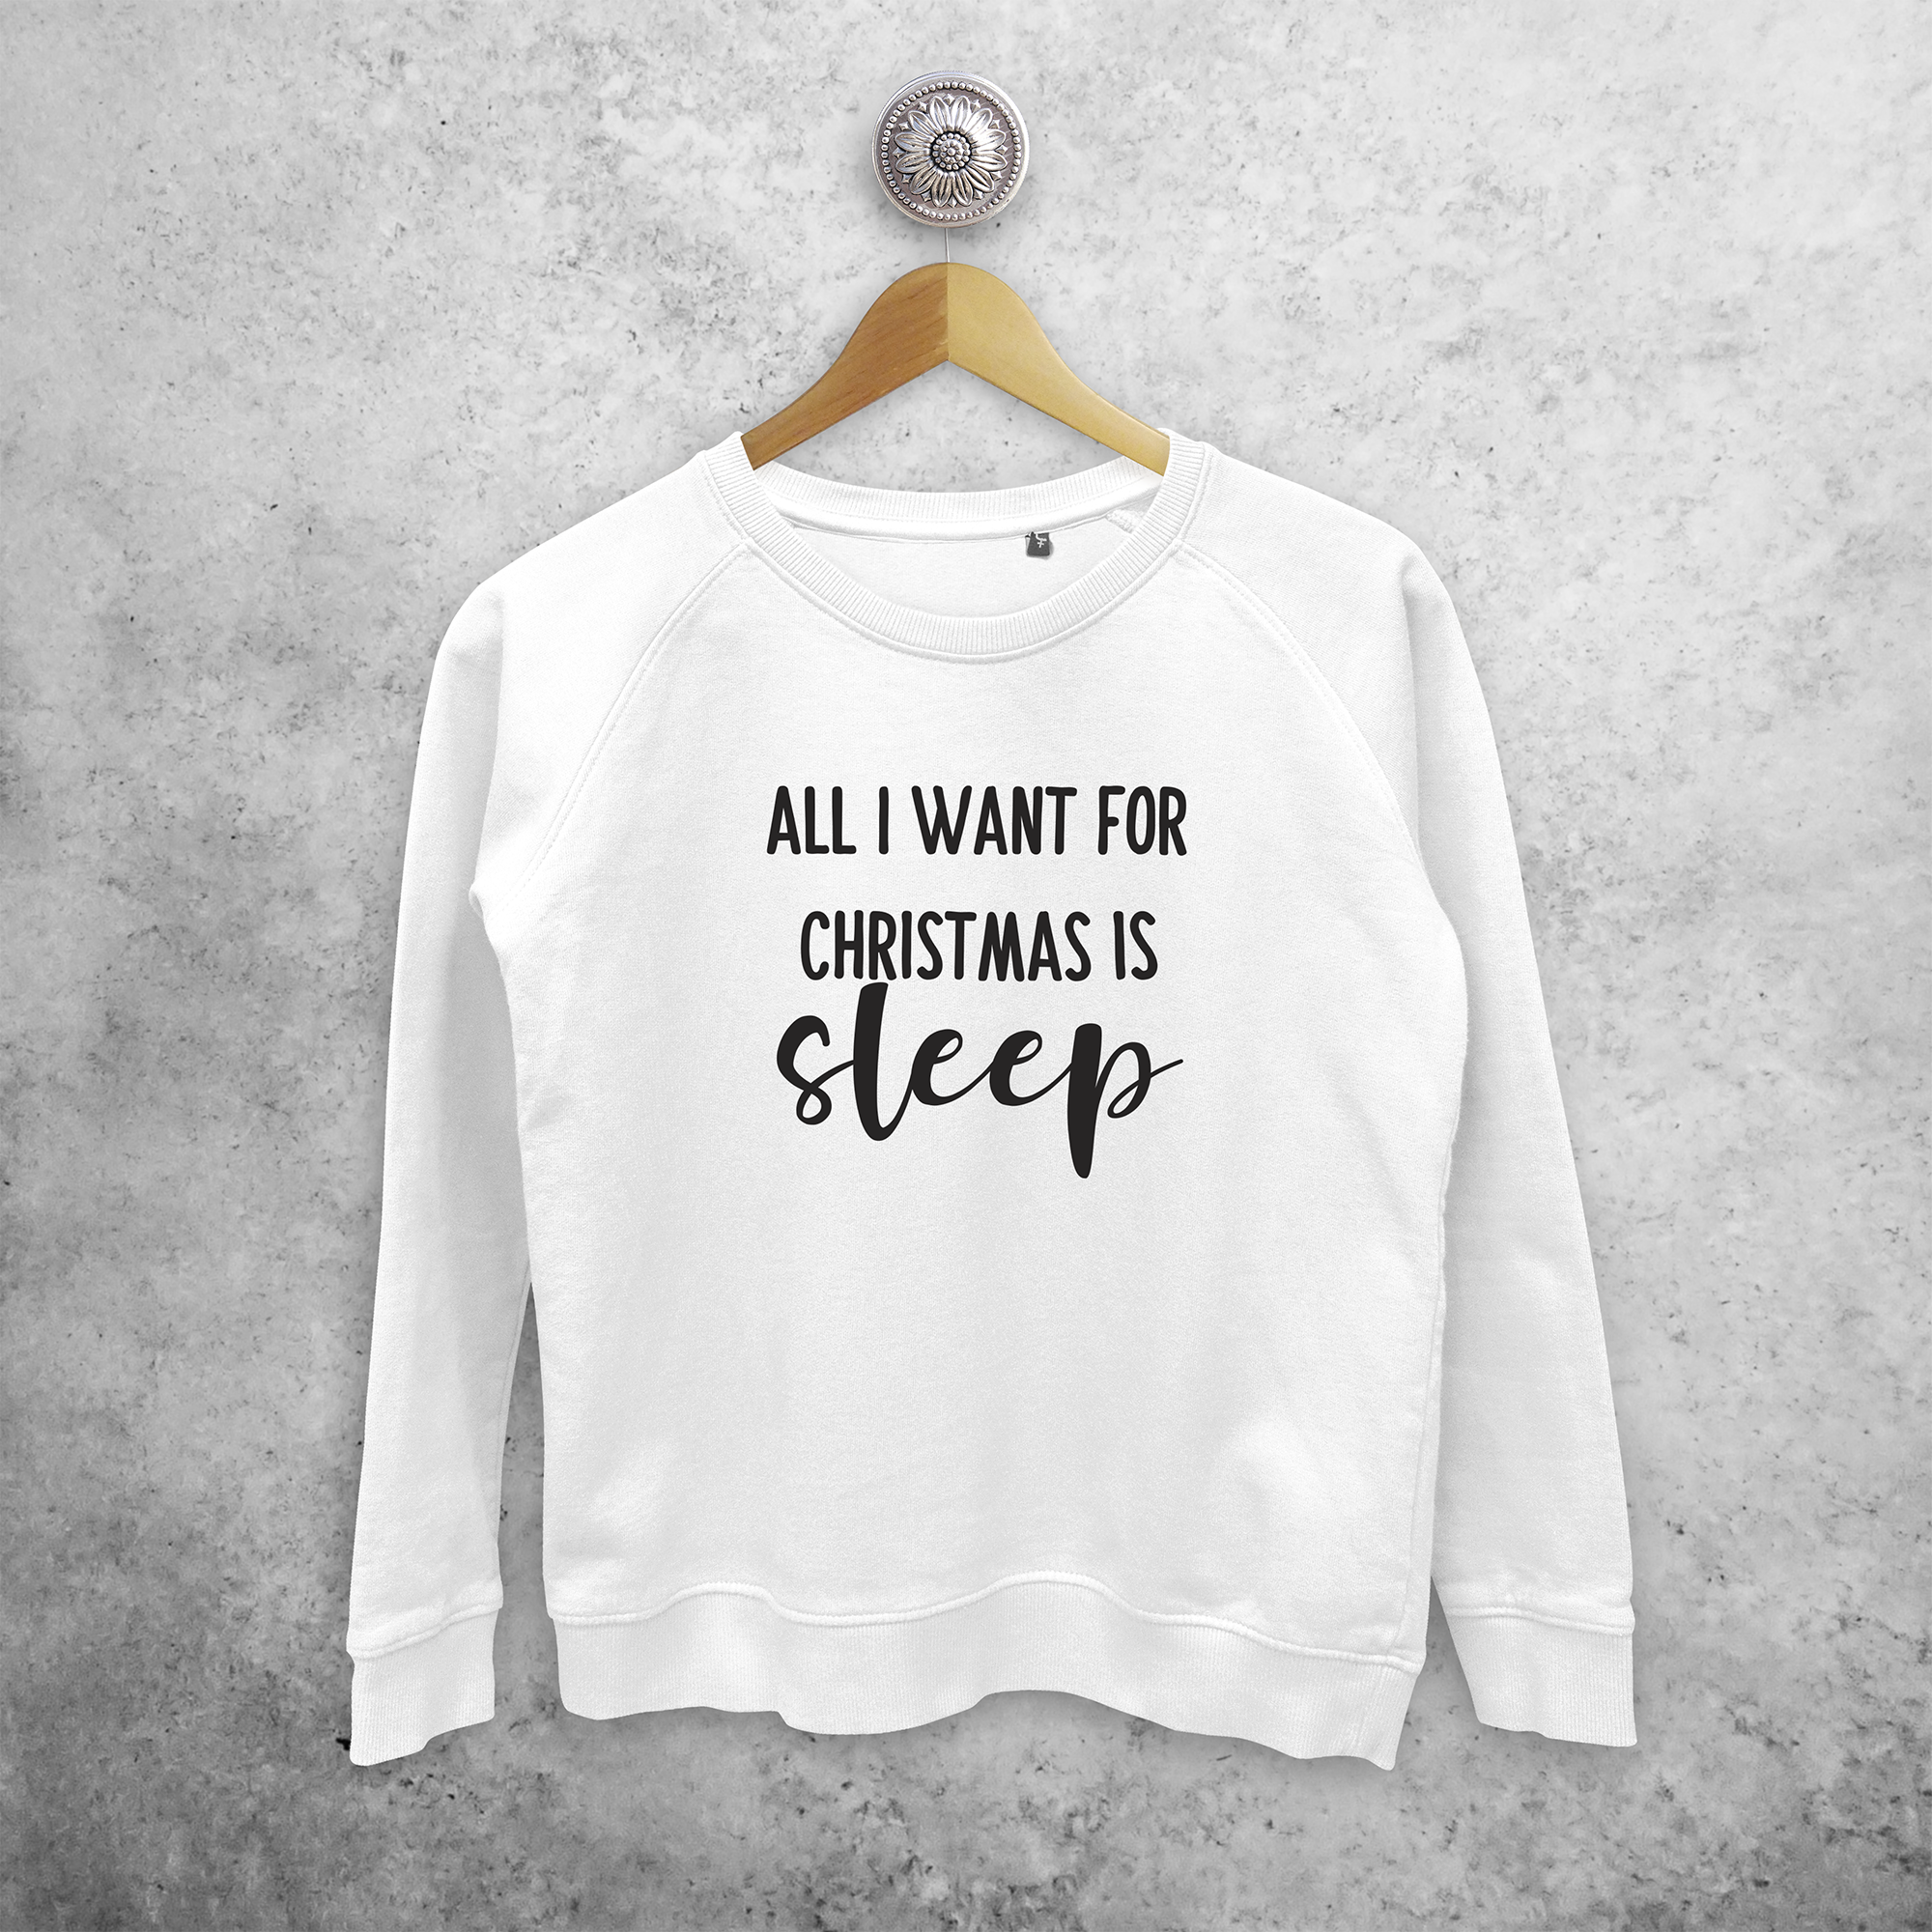 Adult sweater, with ‘All I want for Christmas is sleep’ print by KMLeon.